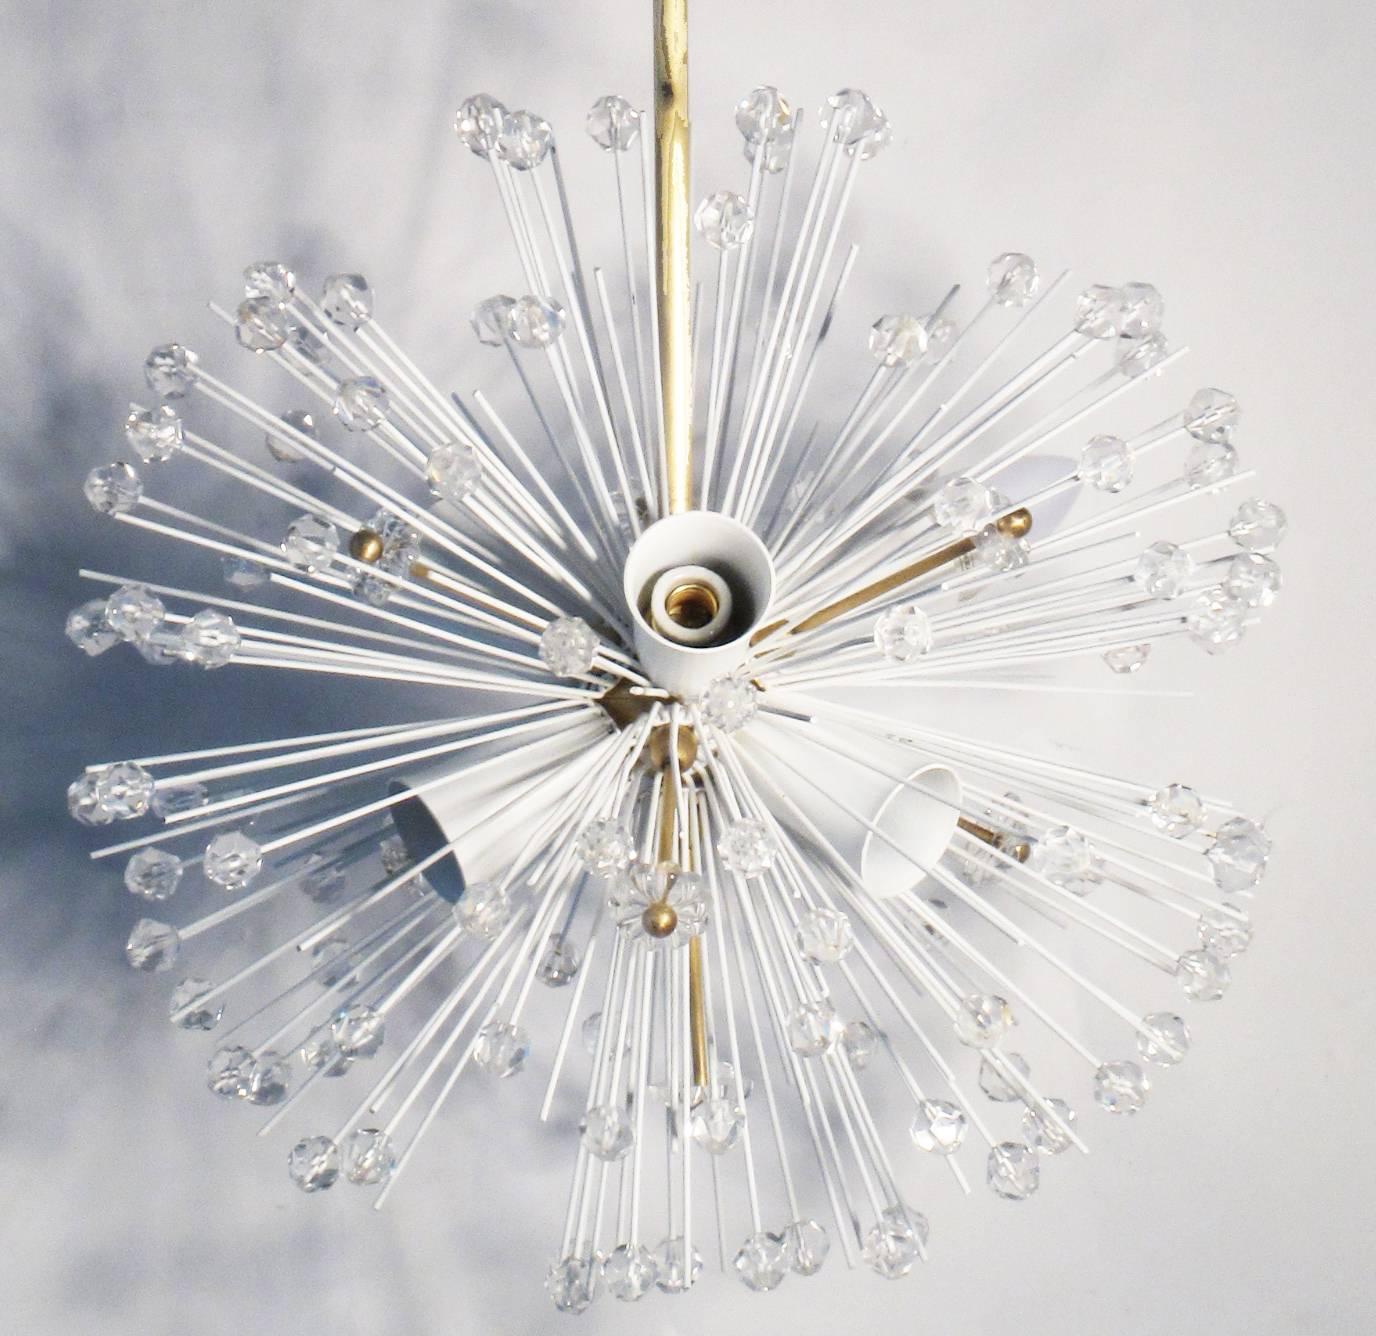 Superb glass and brass chandelier designed by Emil Stejnar in the early 1950s. The chandelier consist of a very long brass stem in one end of a brass ball, attached to it there are 7 arms with glass flowers and glass drops and 6 arms with bulb